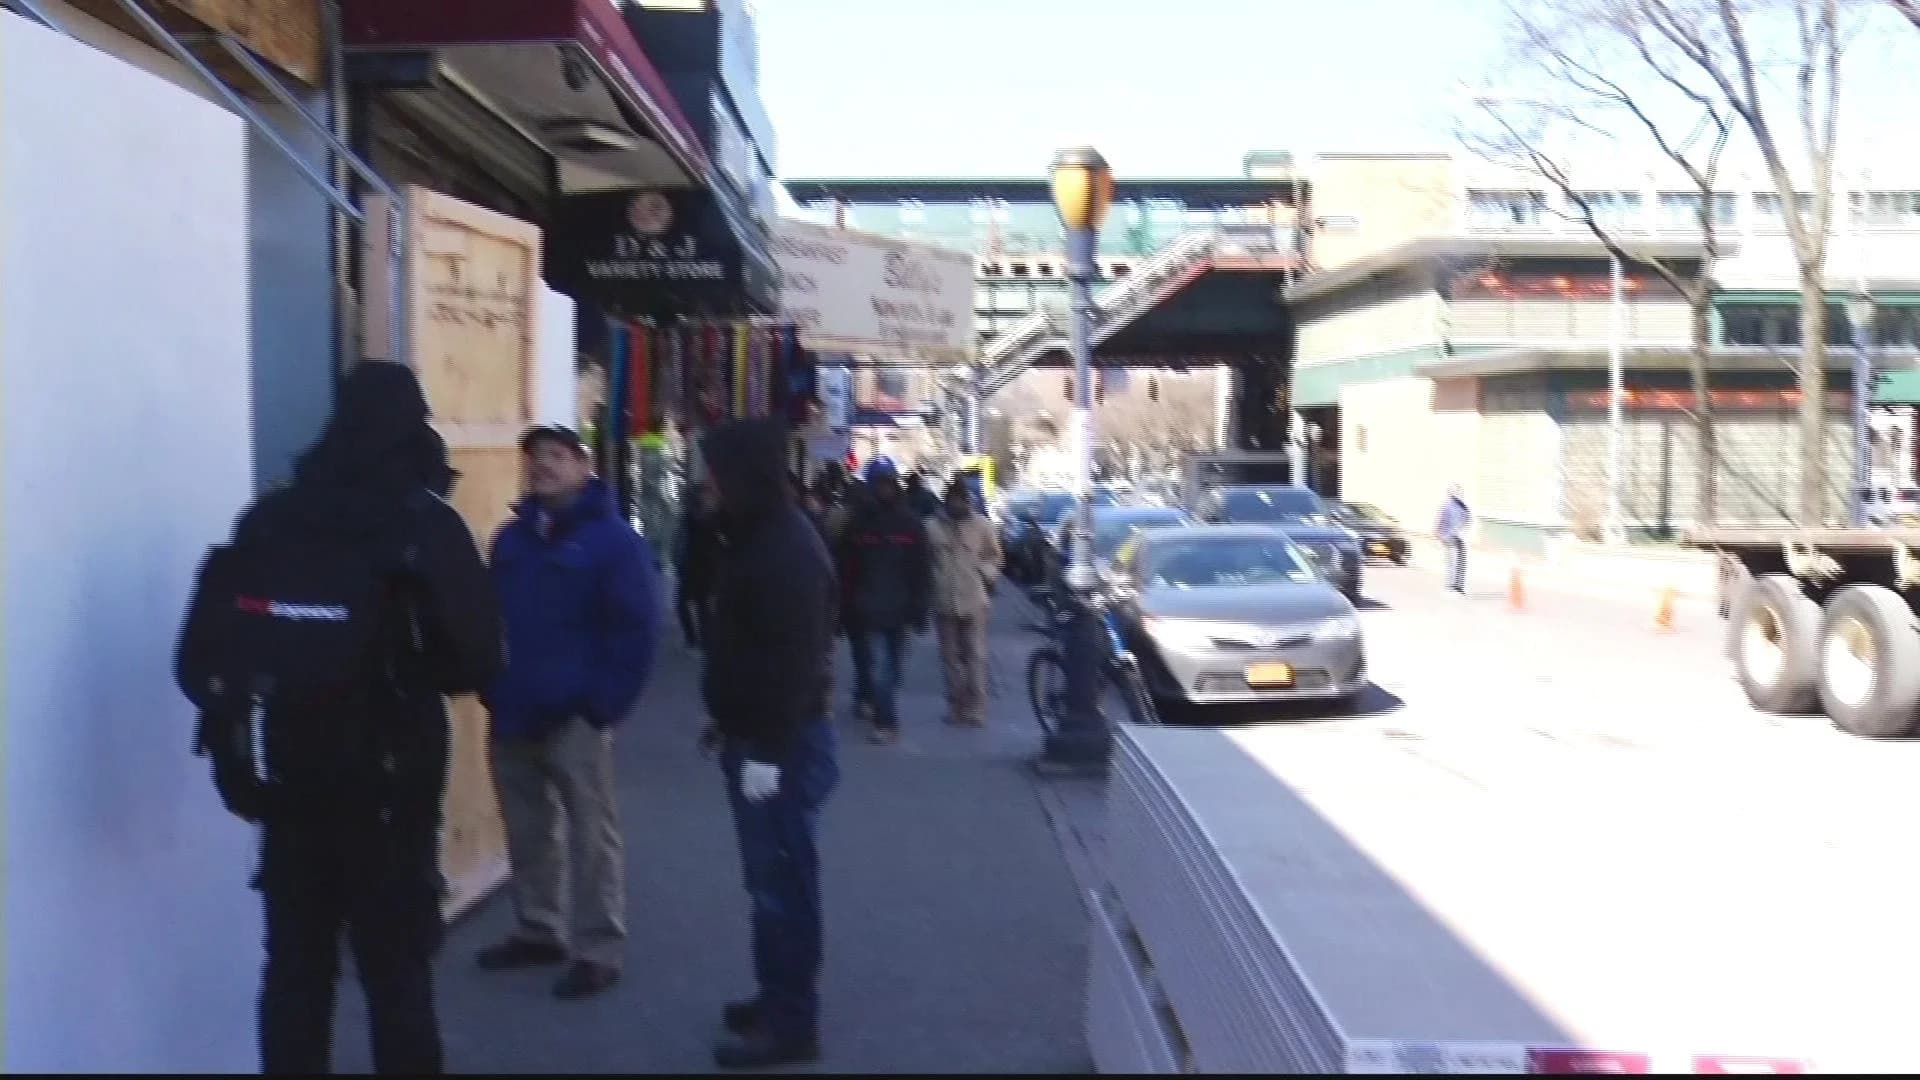 New businesses coming to Yankee Stadium area